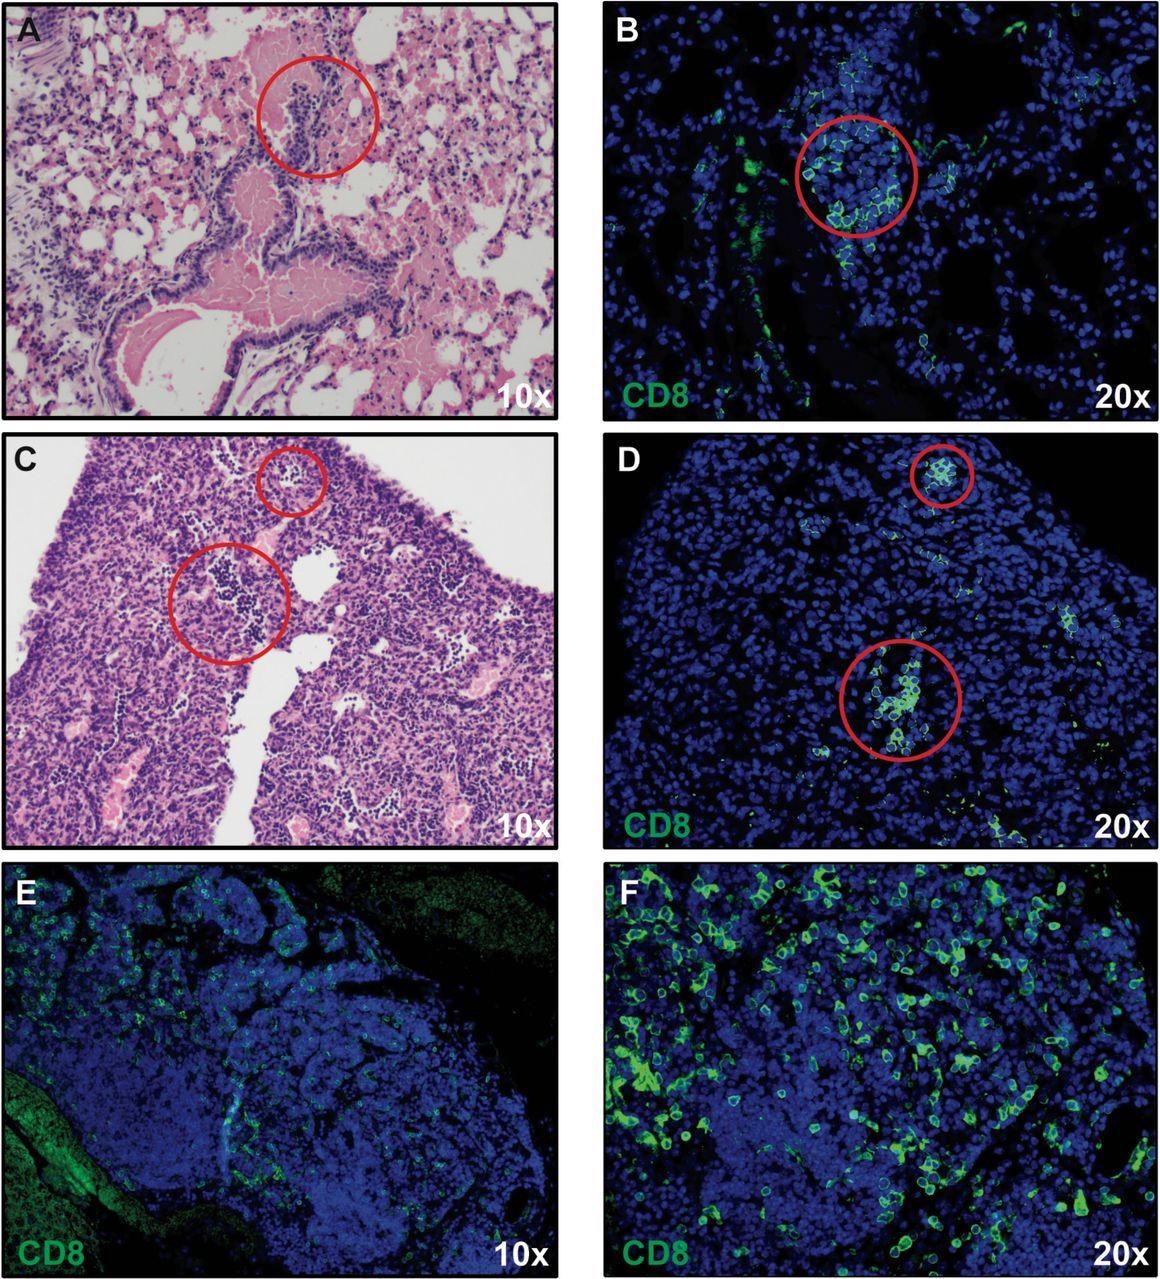 CD8+ T cell infiltration into lungs of SARS-CoV-2-infected mice. H&E staining of lungs of SARS-CoV-2 infected mice at day 7 post-infection reveal inflammation (A and C) associated with CD8+ T cell infiltration (B and D) as determined by immunofluorescent staining. Lymph node-like structures were also detected containing CD8+ T cells (E and F). Panels A, C, and E 10X magnification; panels B, D, and F 20X magnification.